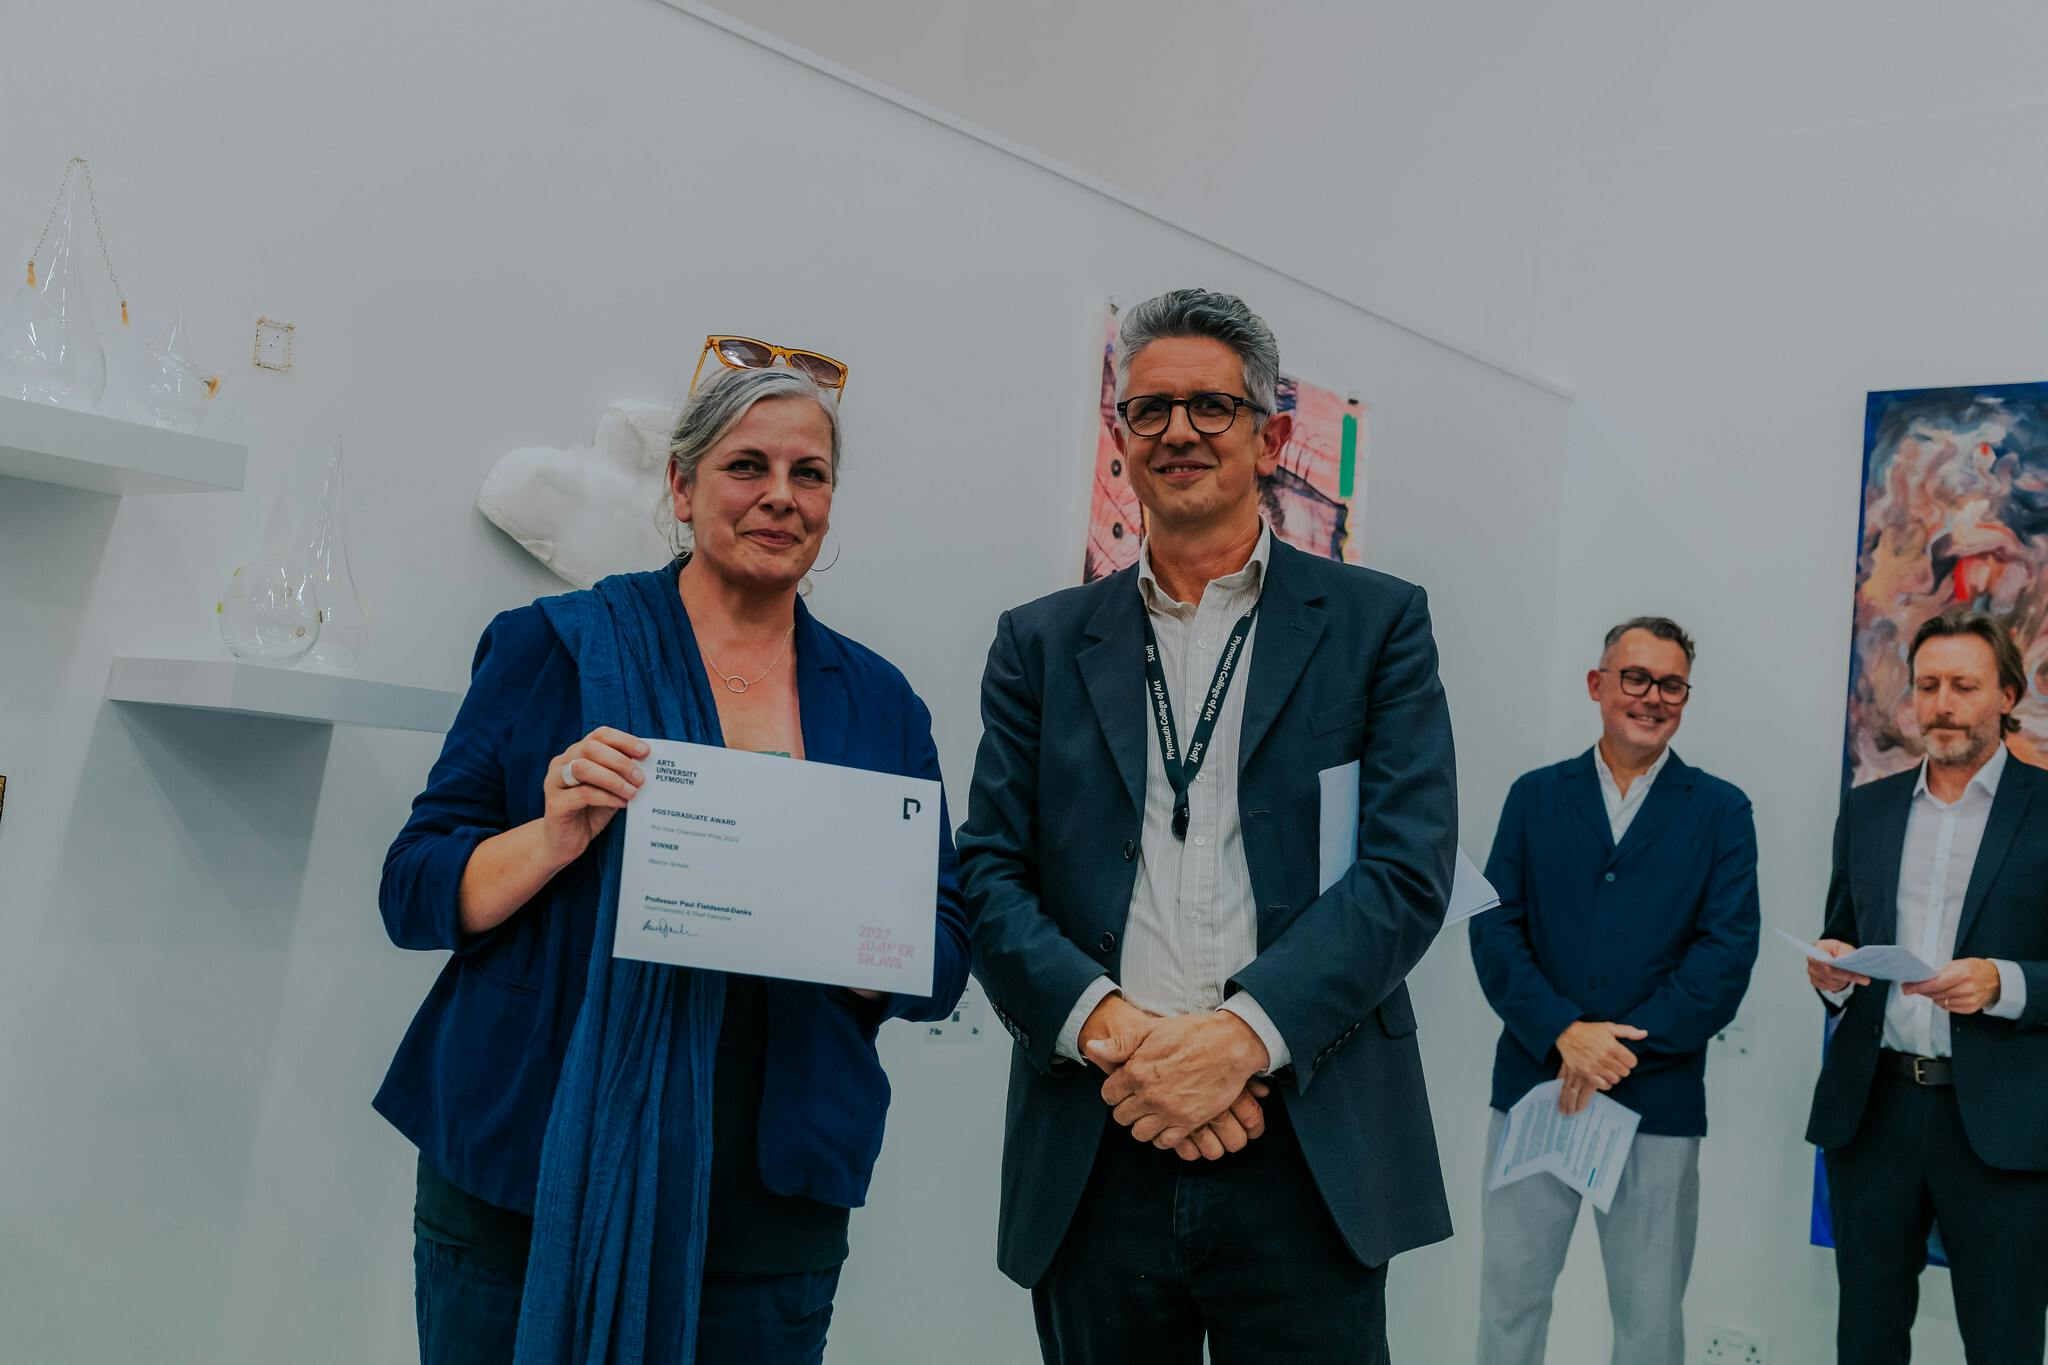 Marion Smylie left holds up her certificate with Prof Stephen Felmingham on the right of her while Dr Stephen Paige and Prof Paul Fieldsend Danks look on from the background